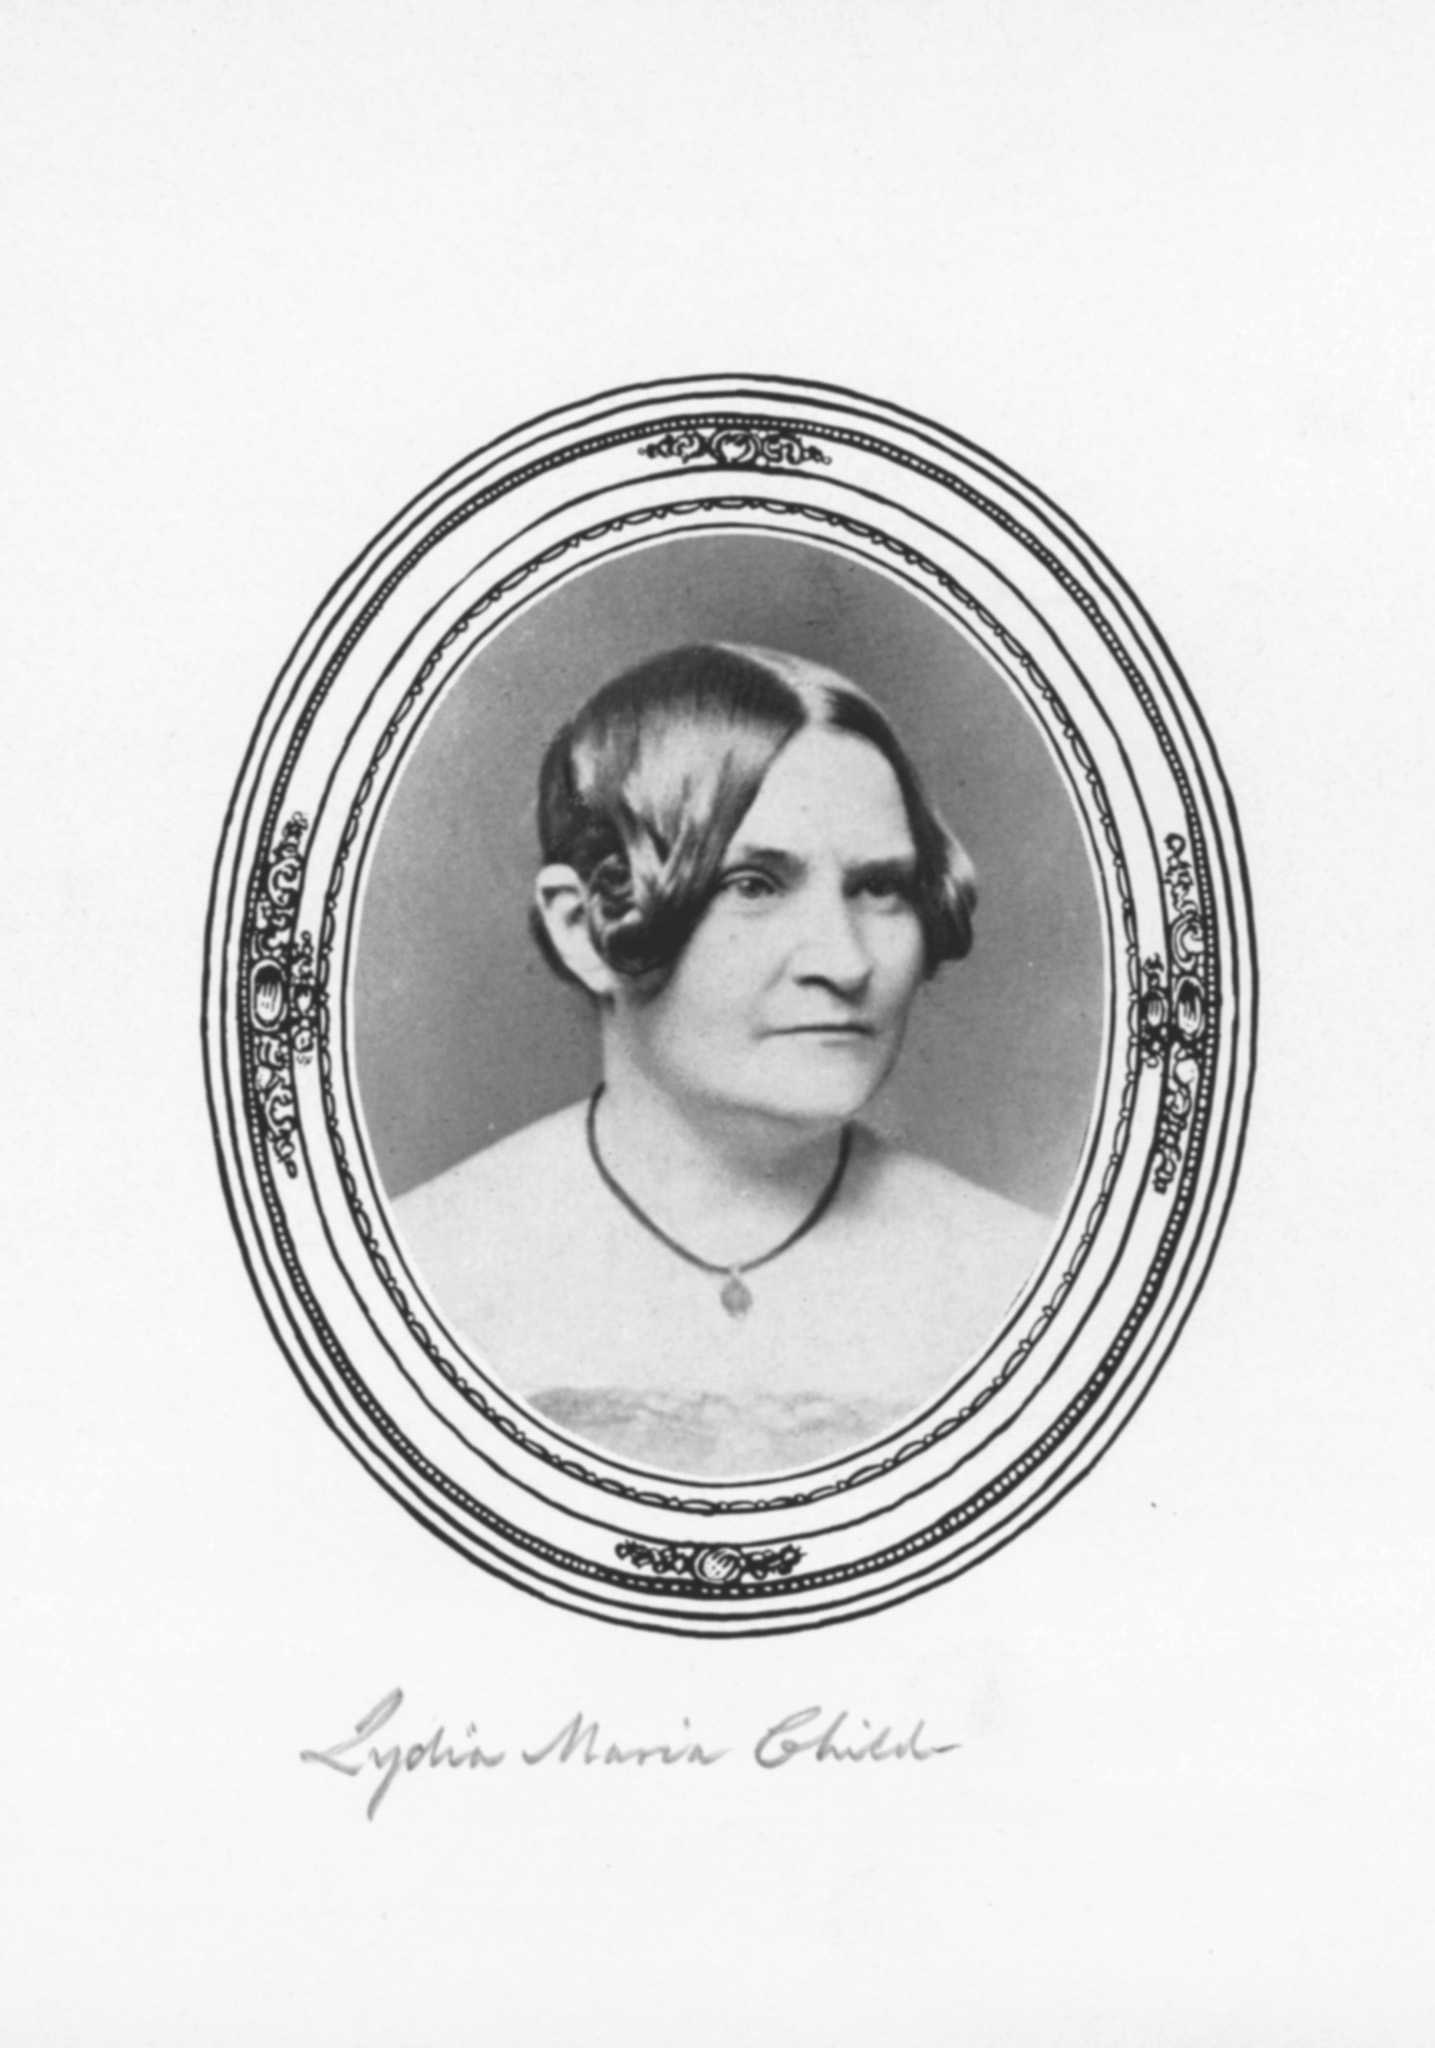 Photograph of Lydia Maria Child in oval-shaped frame